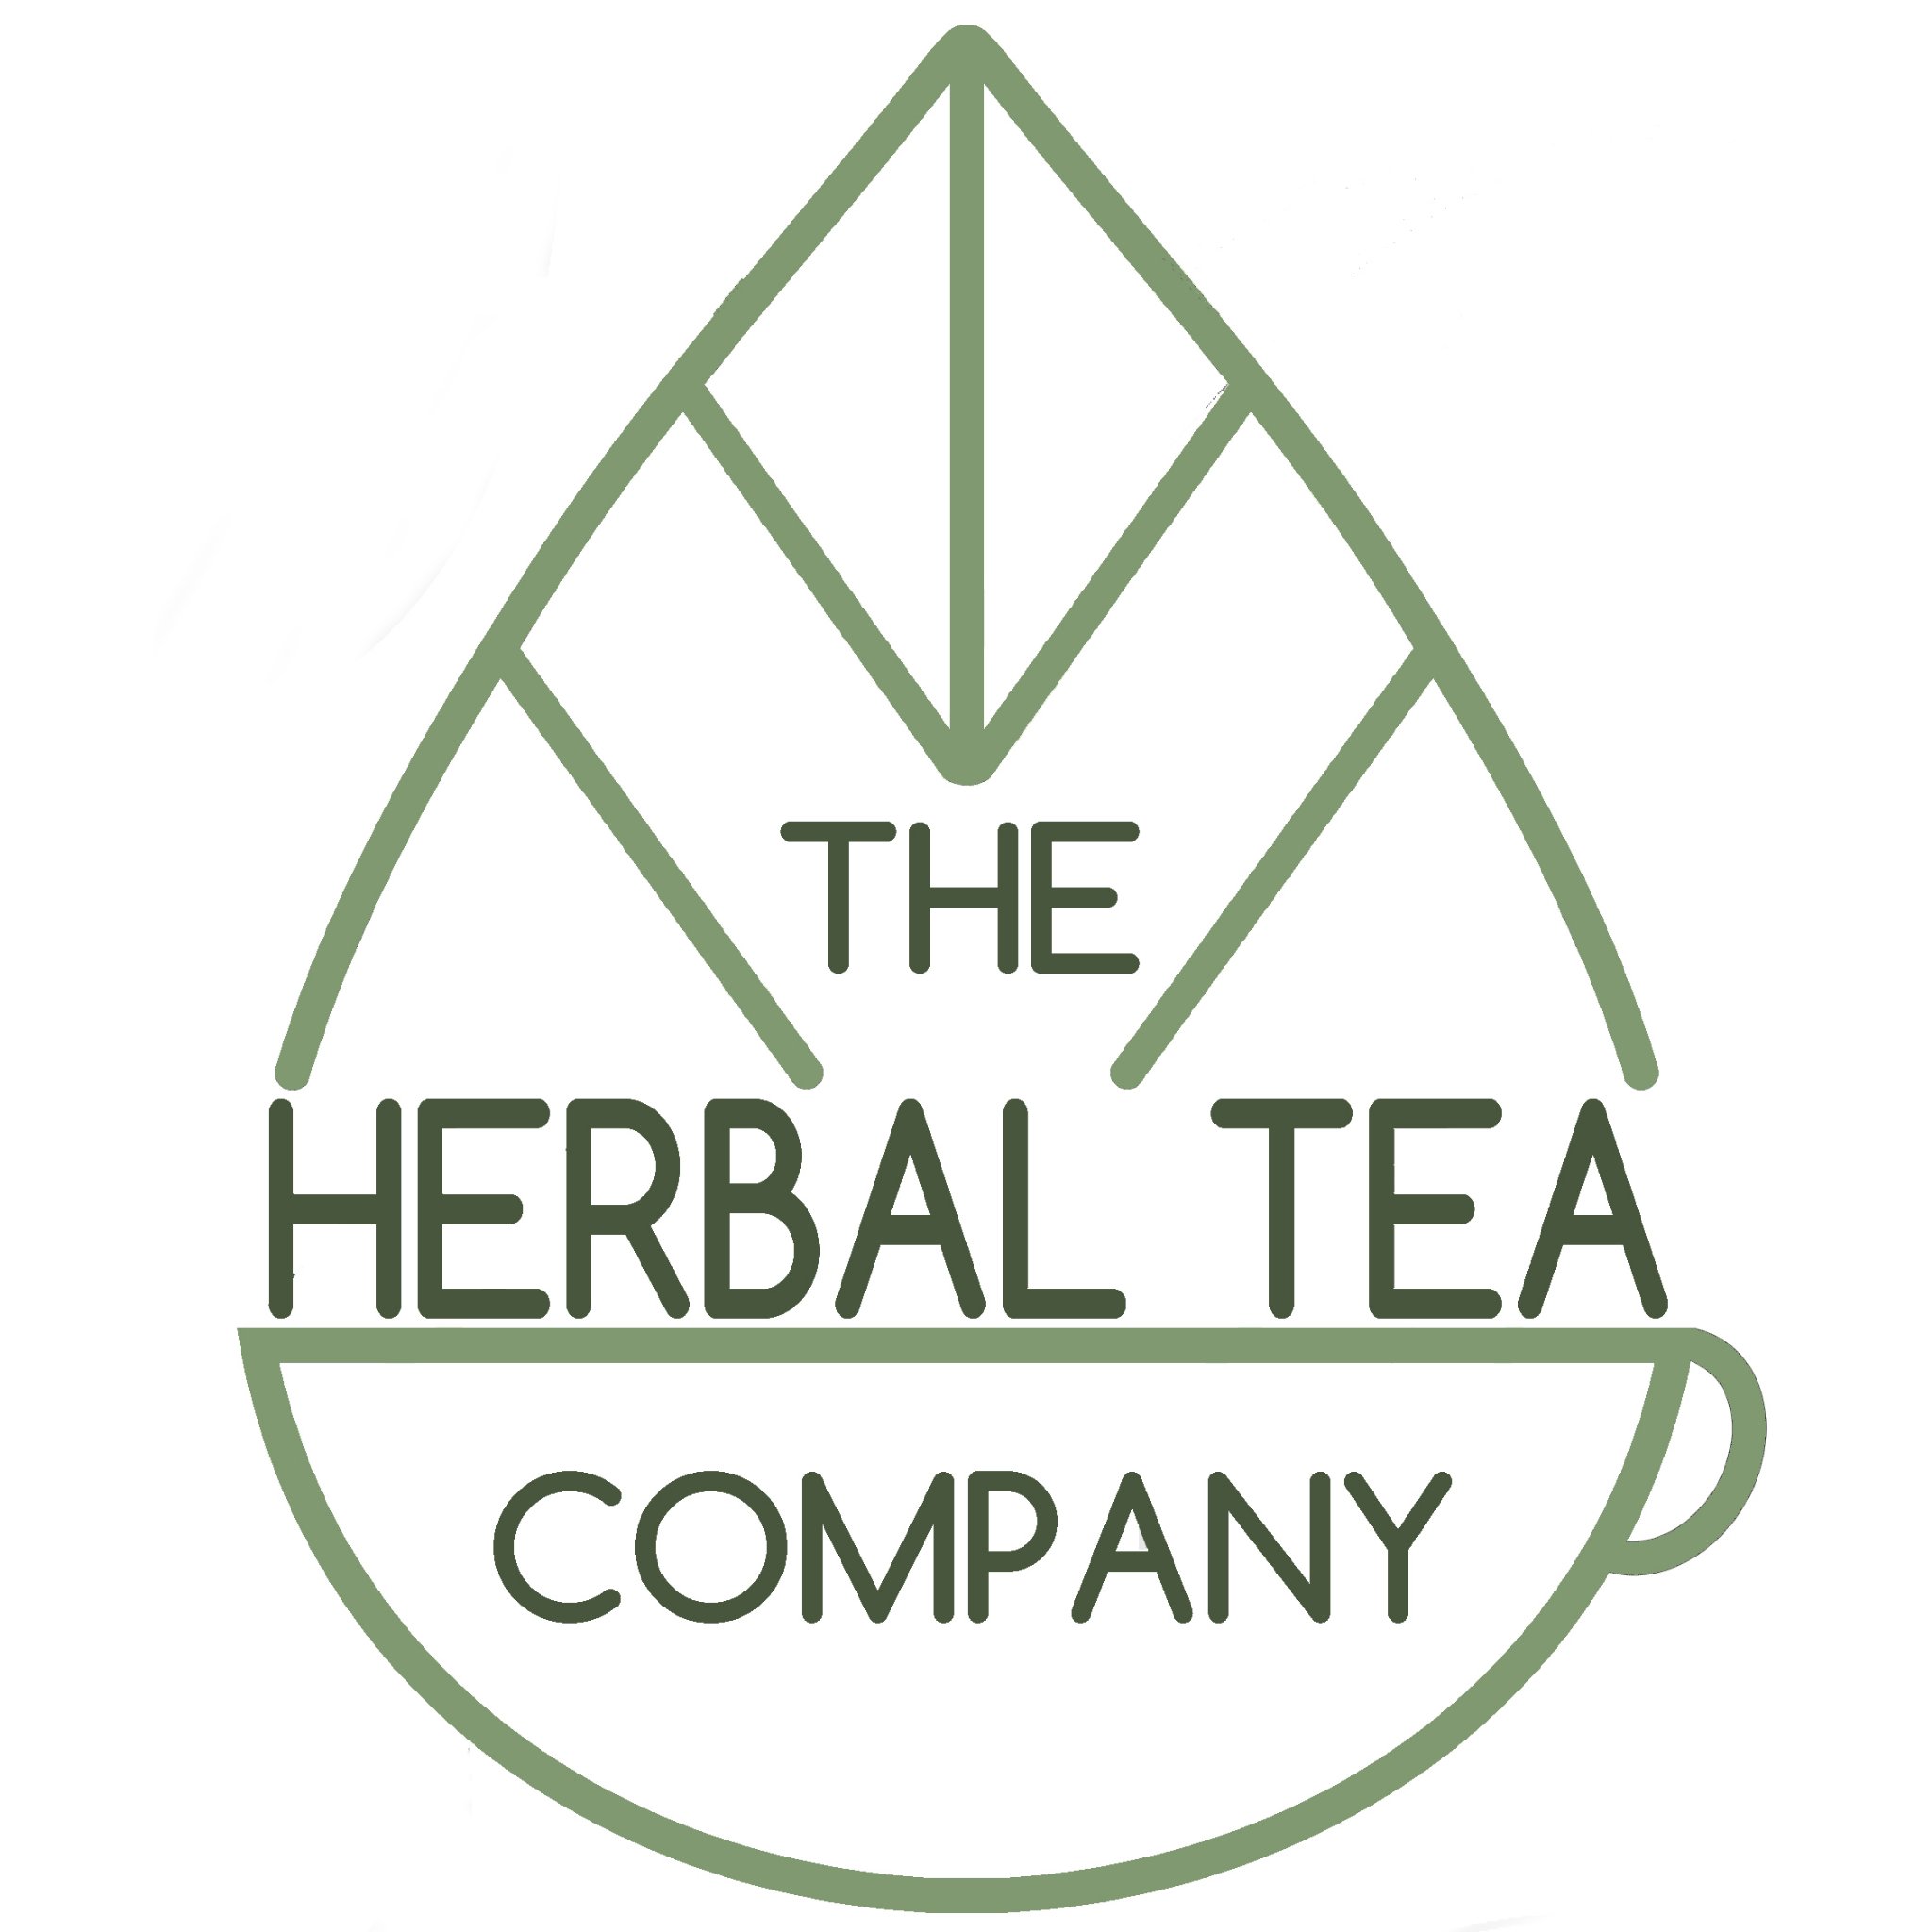 The Herbal Tea Company is a unique online platform that enables you to buy high quality herbal teas in any combination.